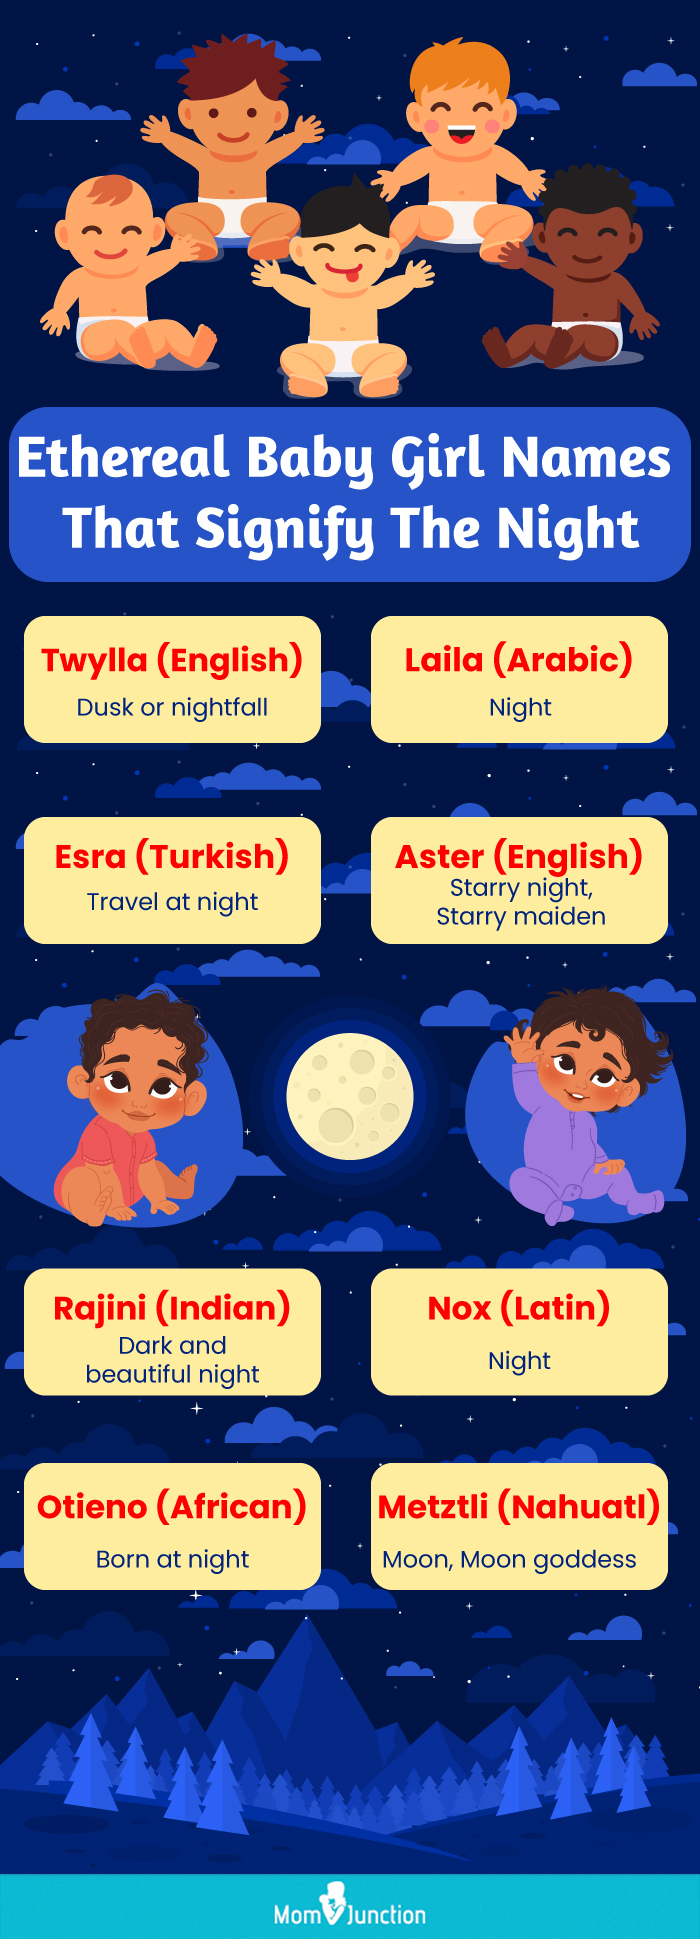 ethereal baby girl names that signify the night (infographic)